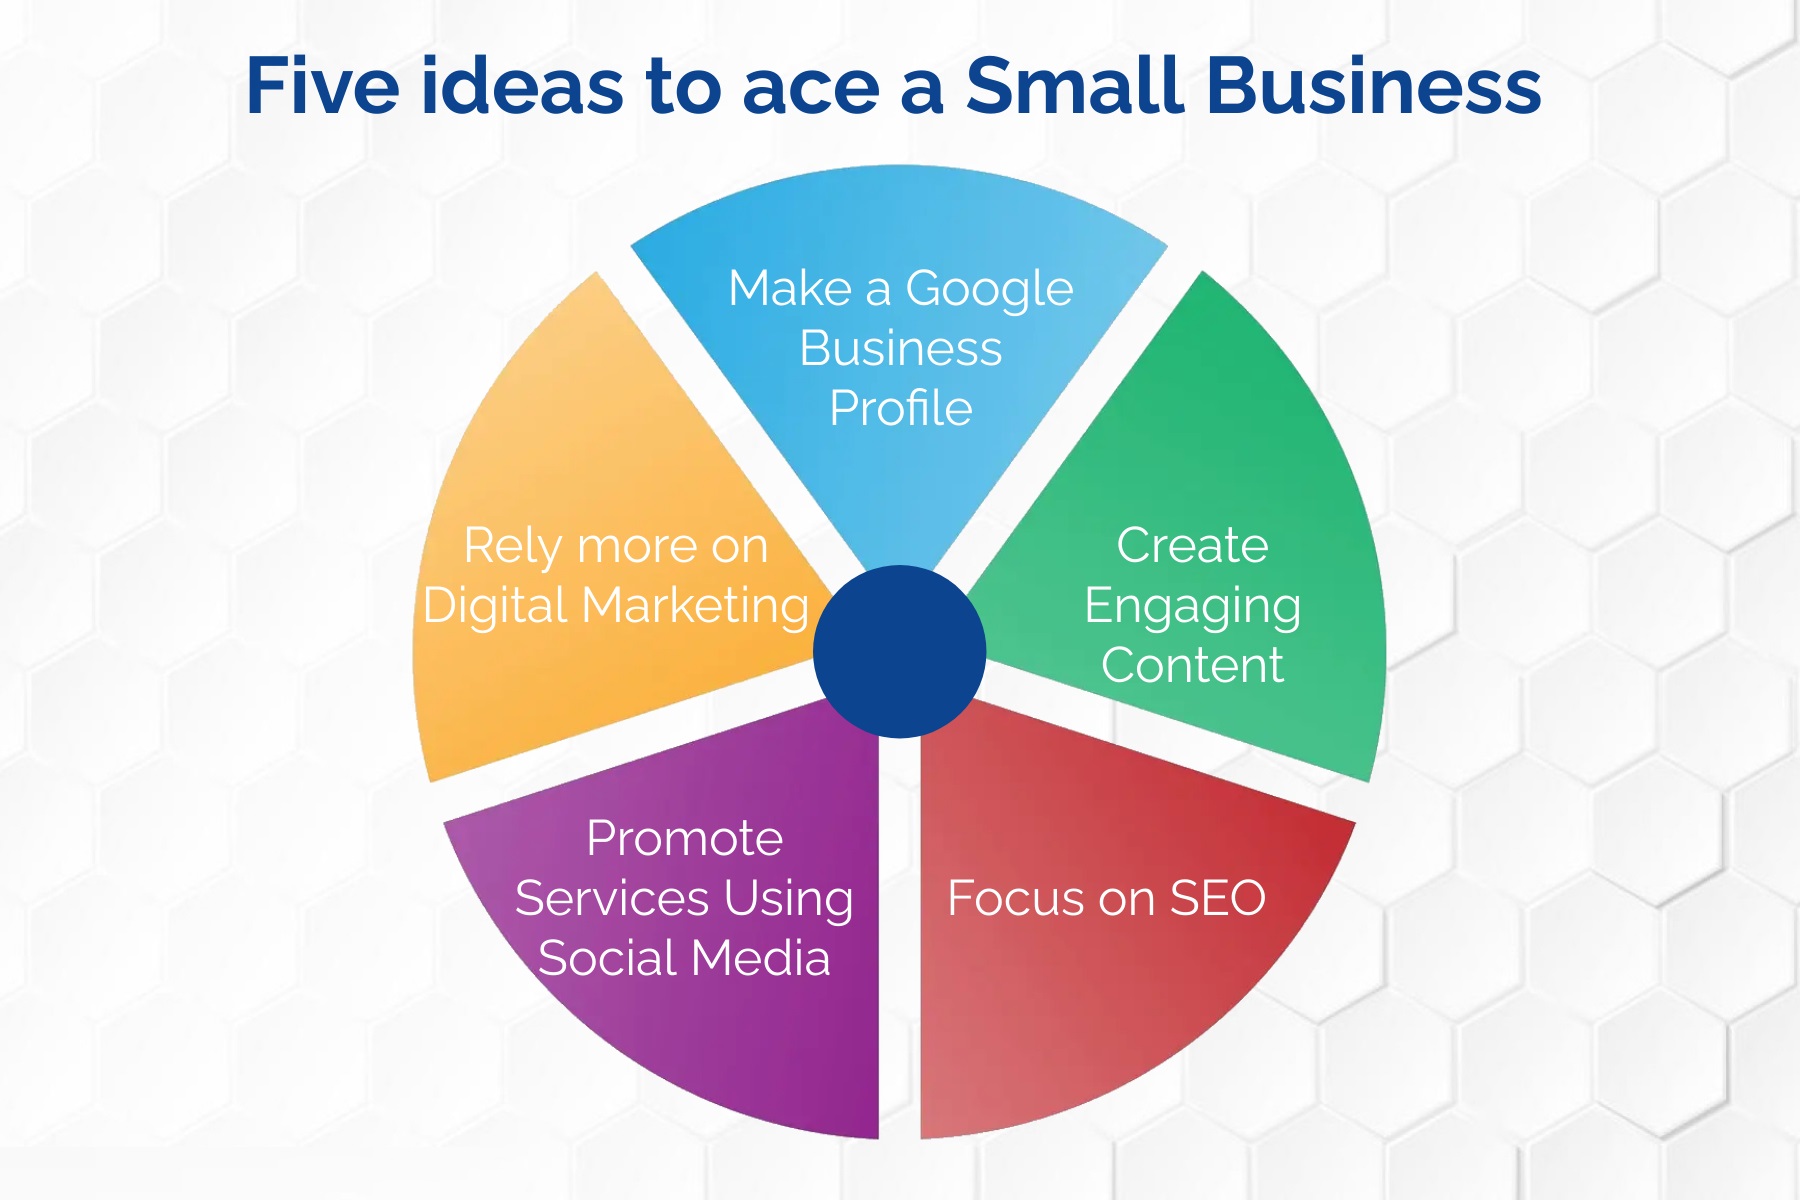 Five Ideas to Ace a Small Business